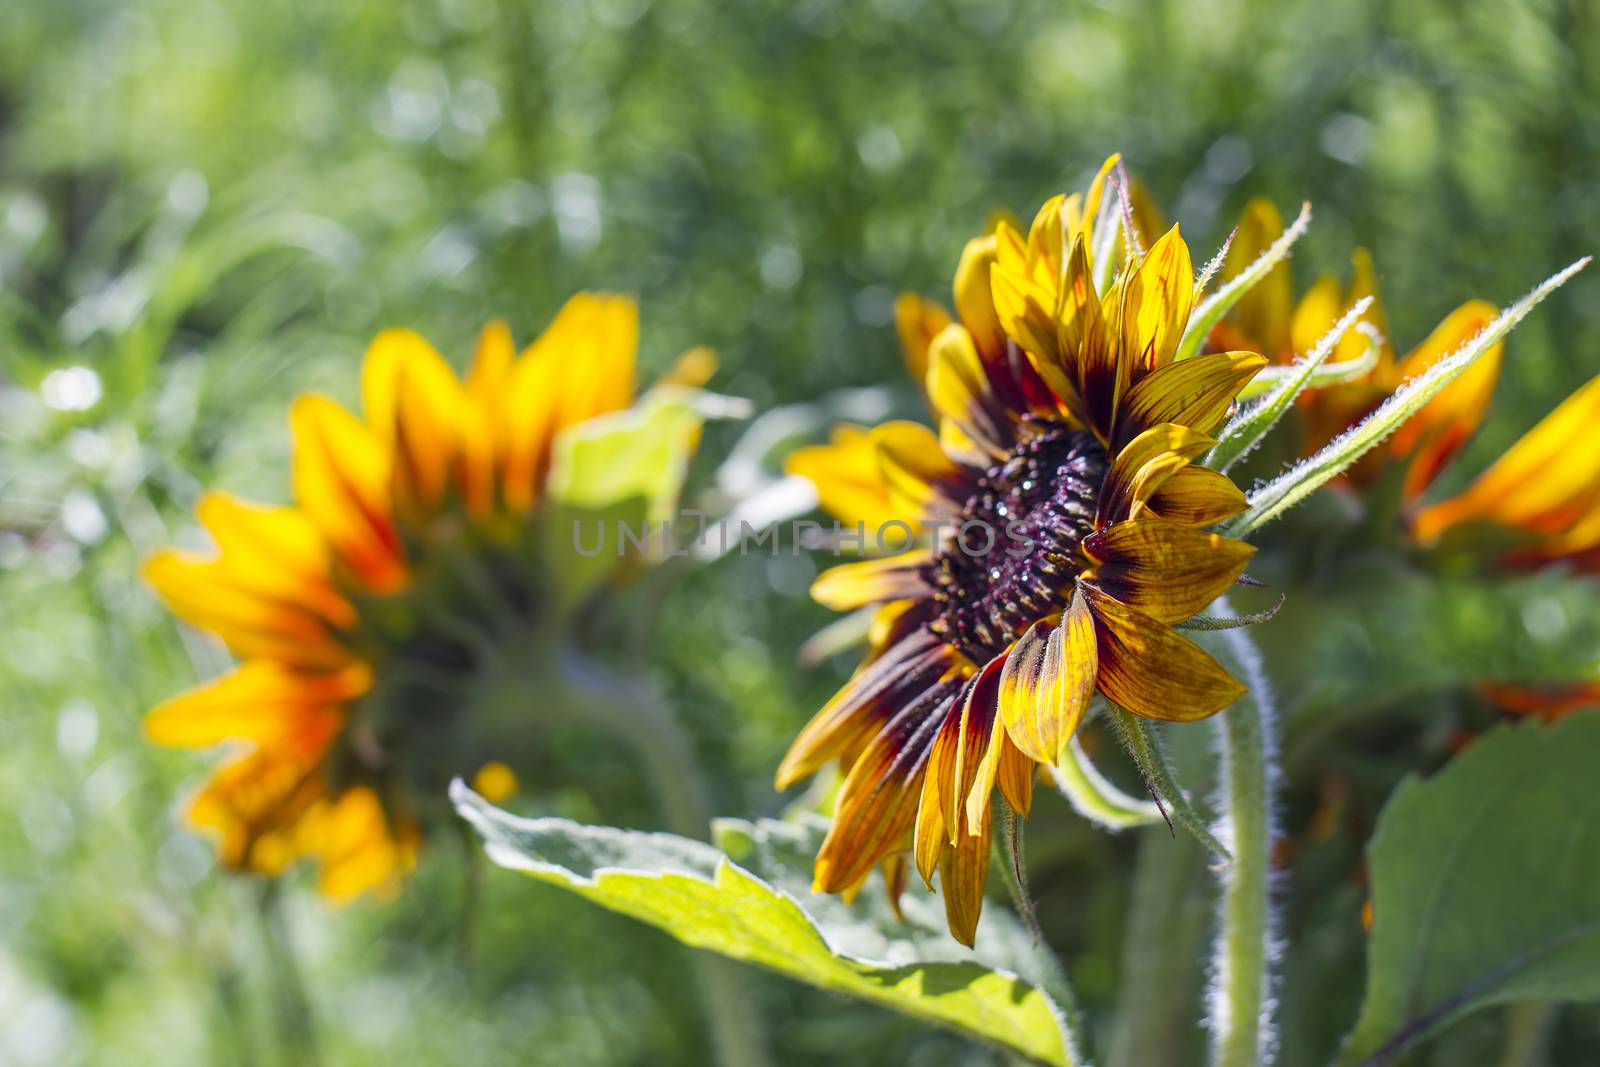 sunflowers in the garden (Helianthus), with natural bokeh, selective focus